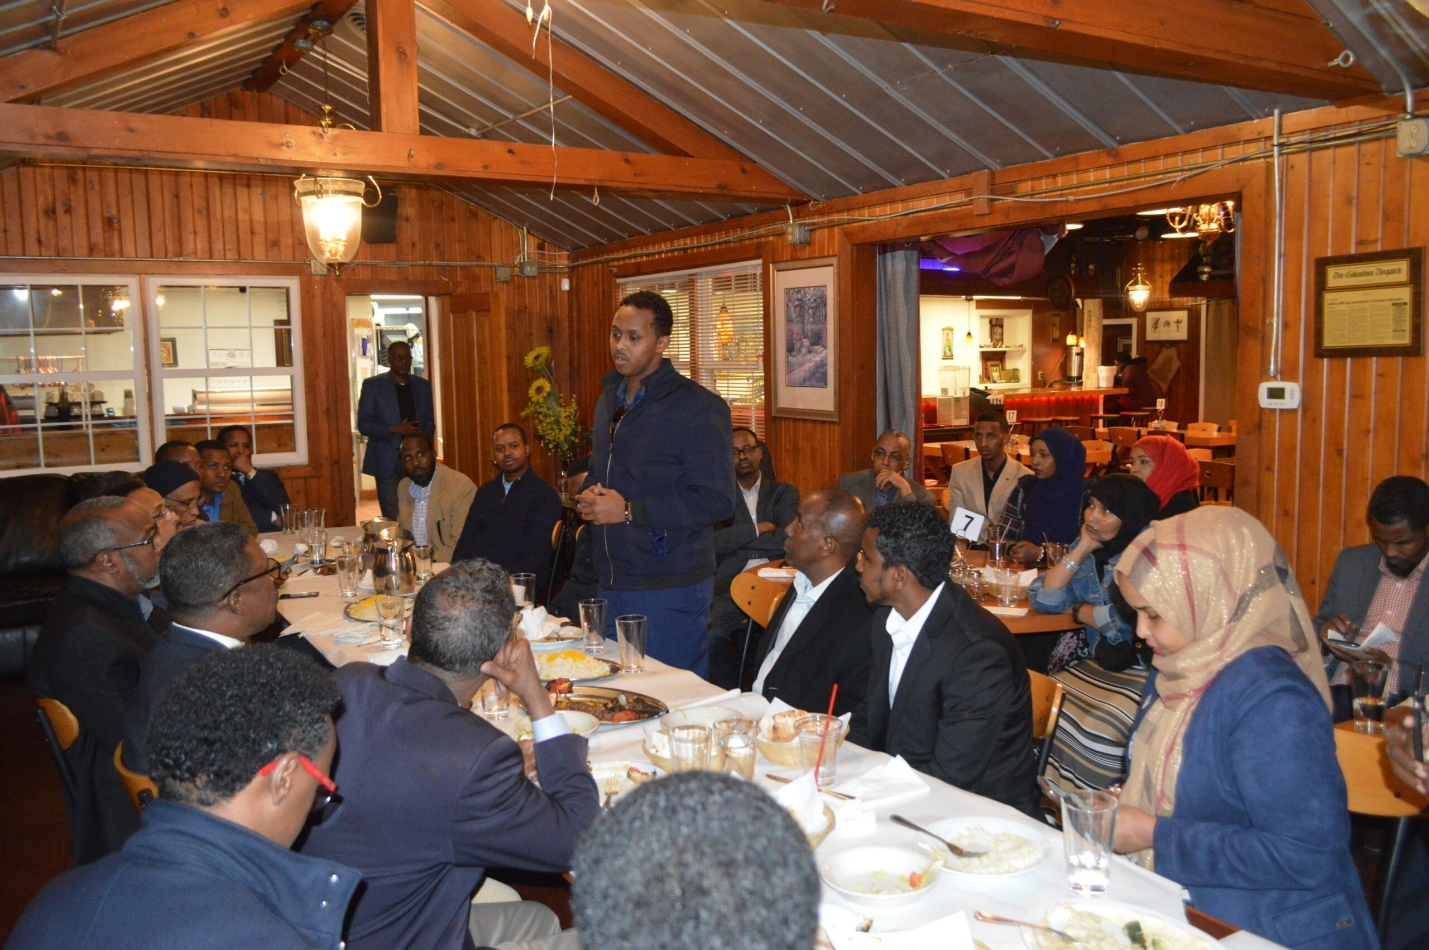 Somali leaders discussing the Somali Community in Central Ohio